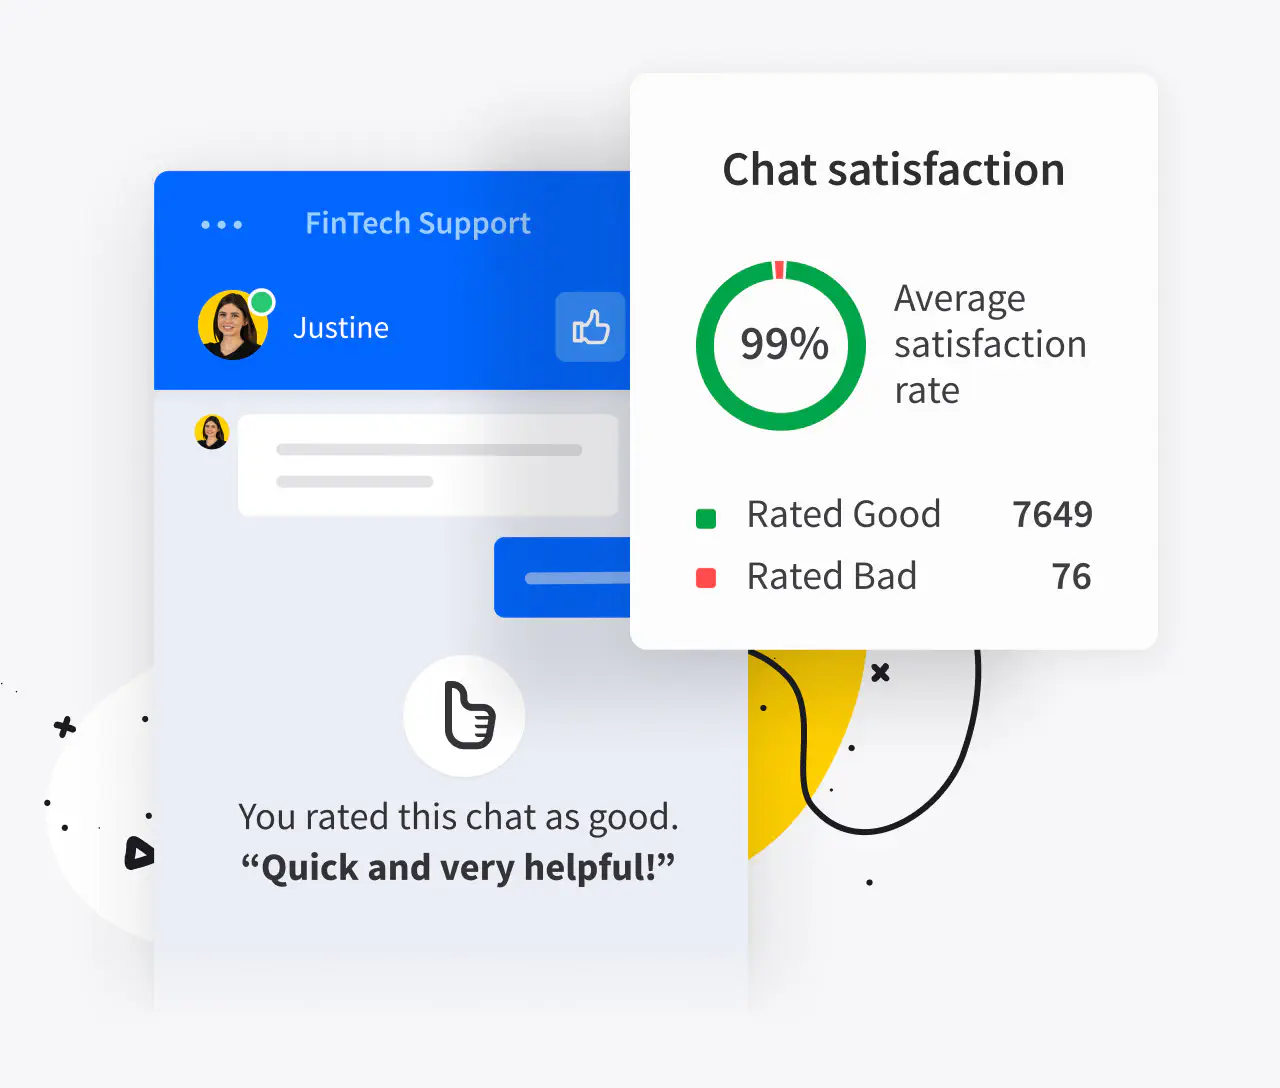 Feedback from live chat